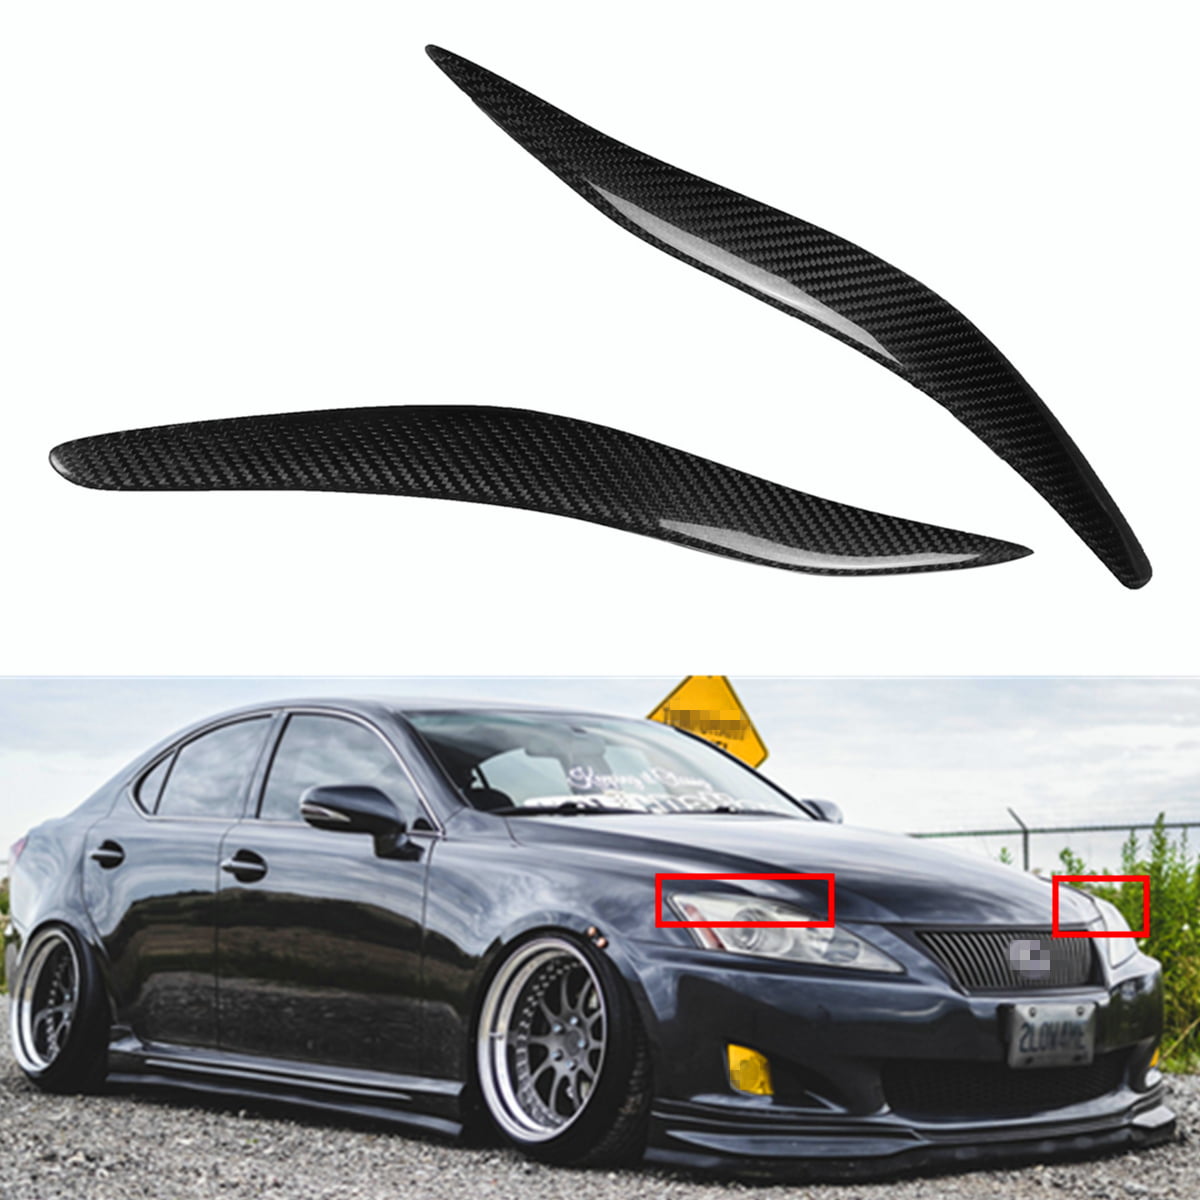 Bestlymood Carbon Fiber Headlight Cover Eyebrow Eyelid Fit for IS250 IS300 IS200 